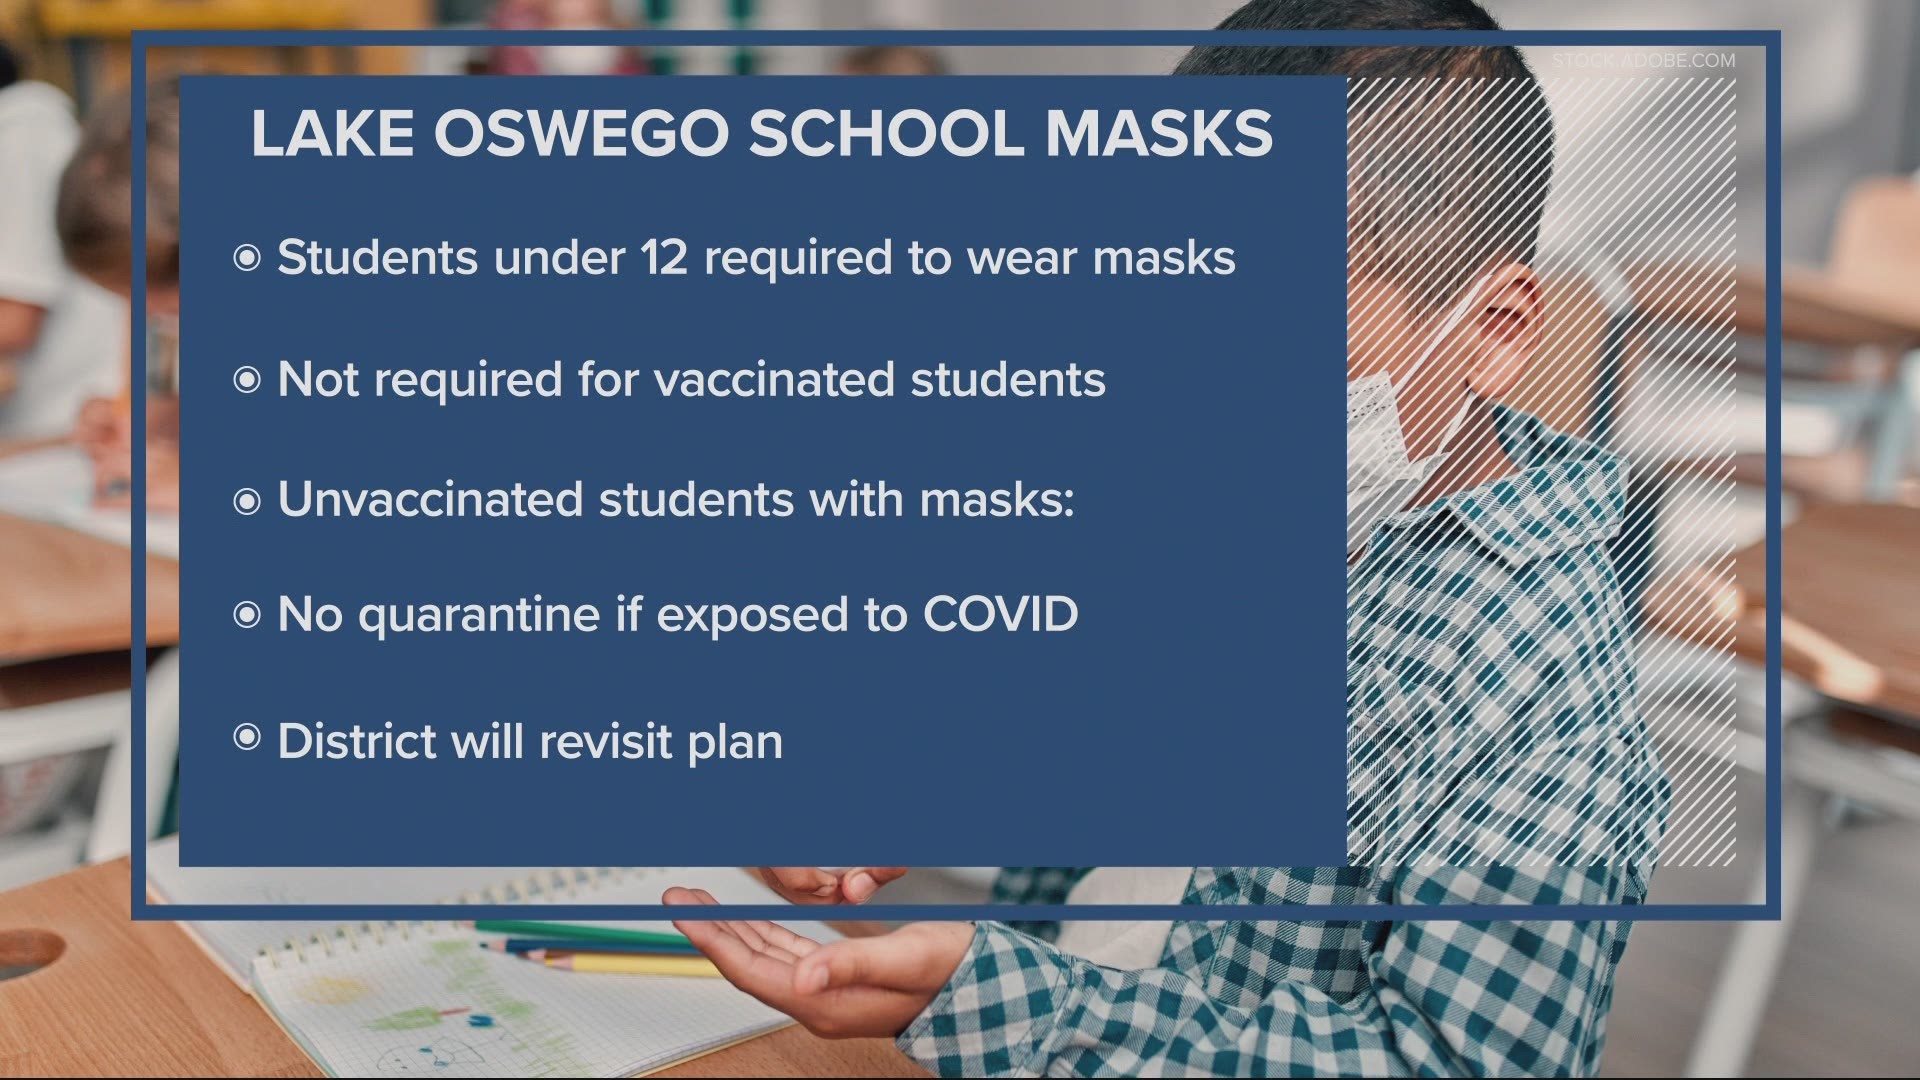 The Lake Oswego School District did not mandate a required quarantine for students, even if they are exposed to the virus.